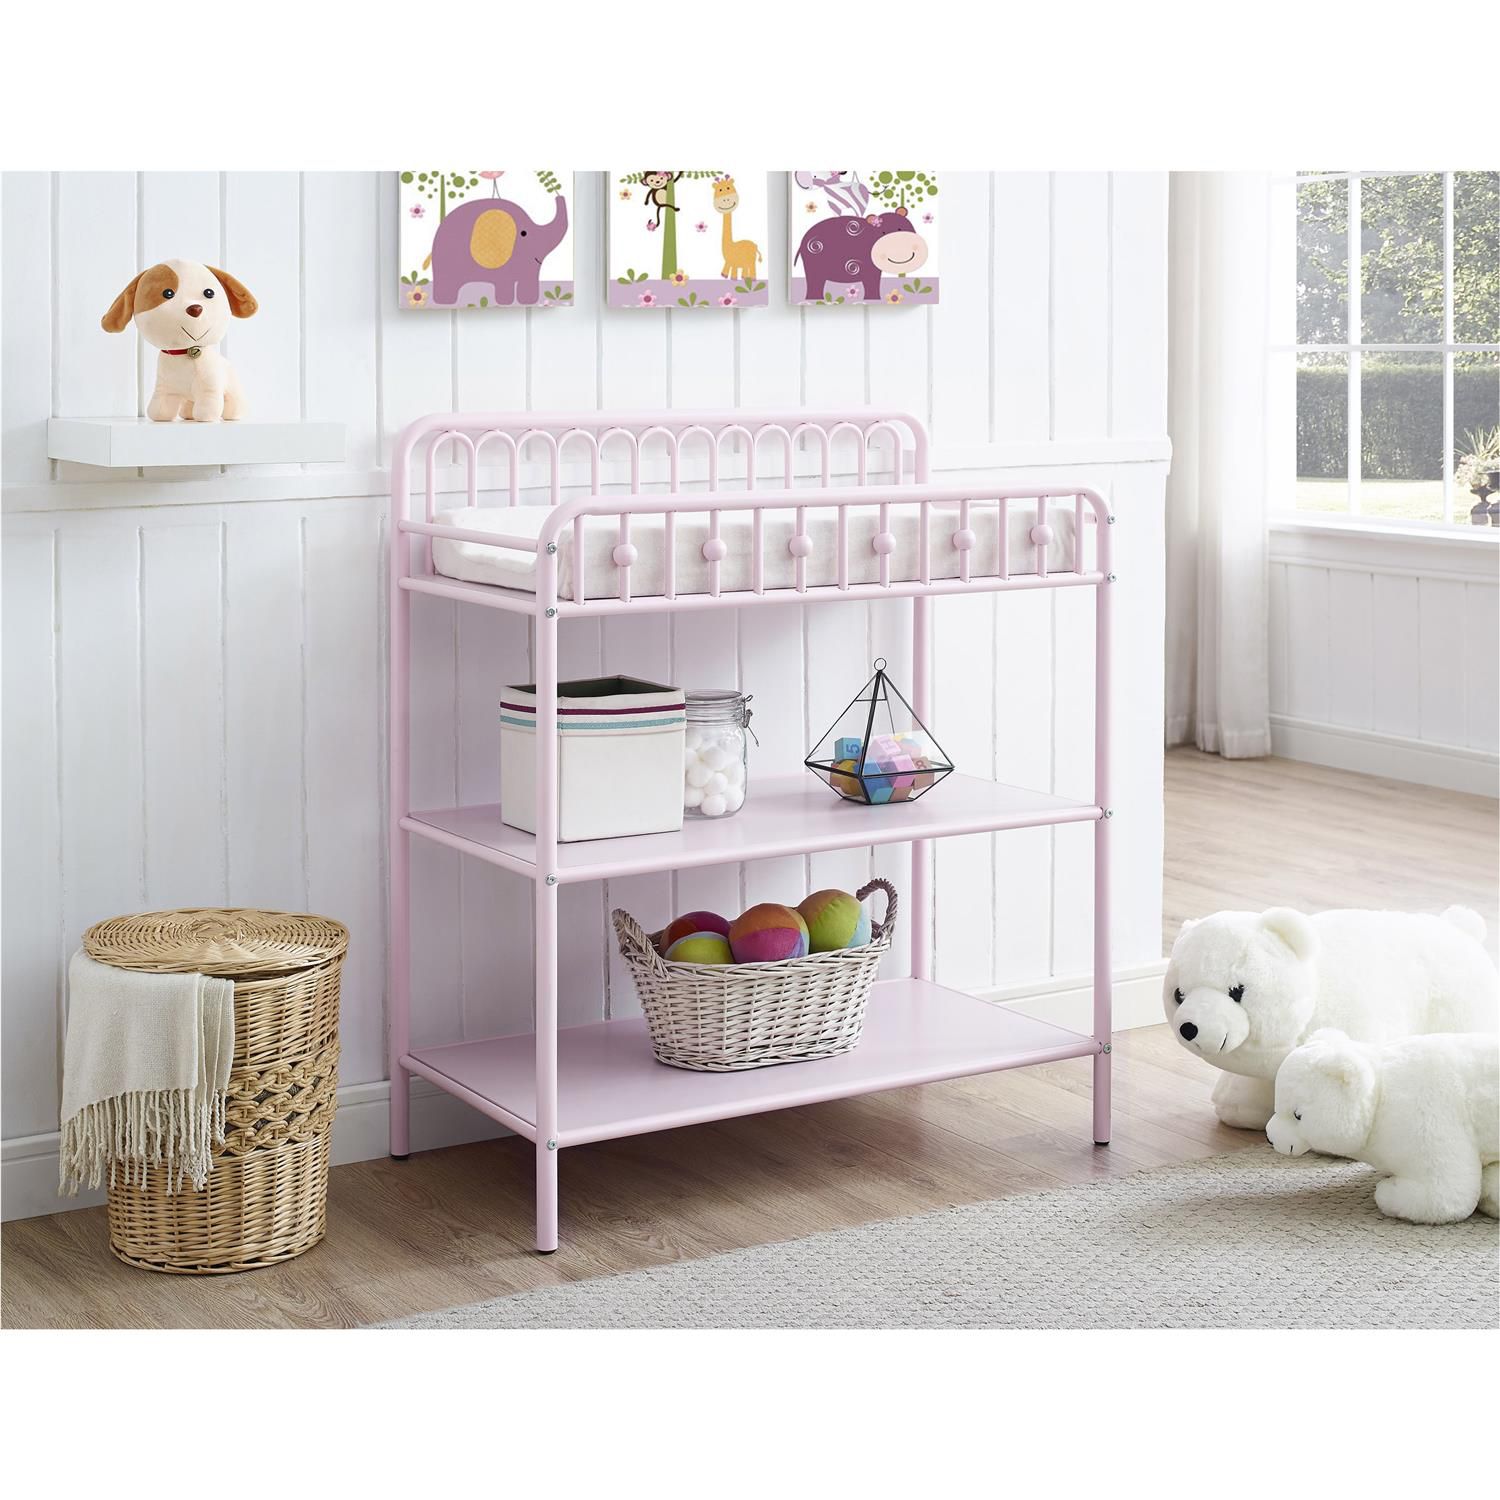 monarch hill changing table